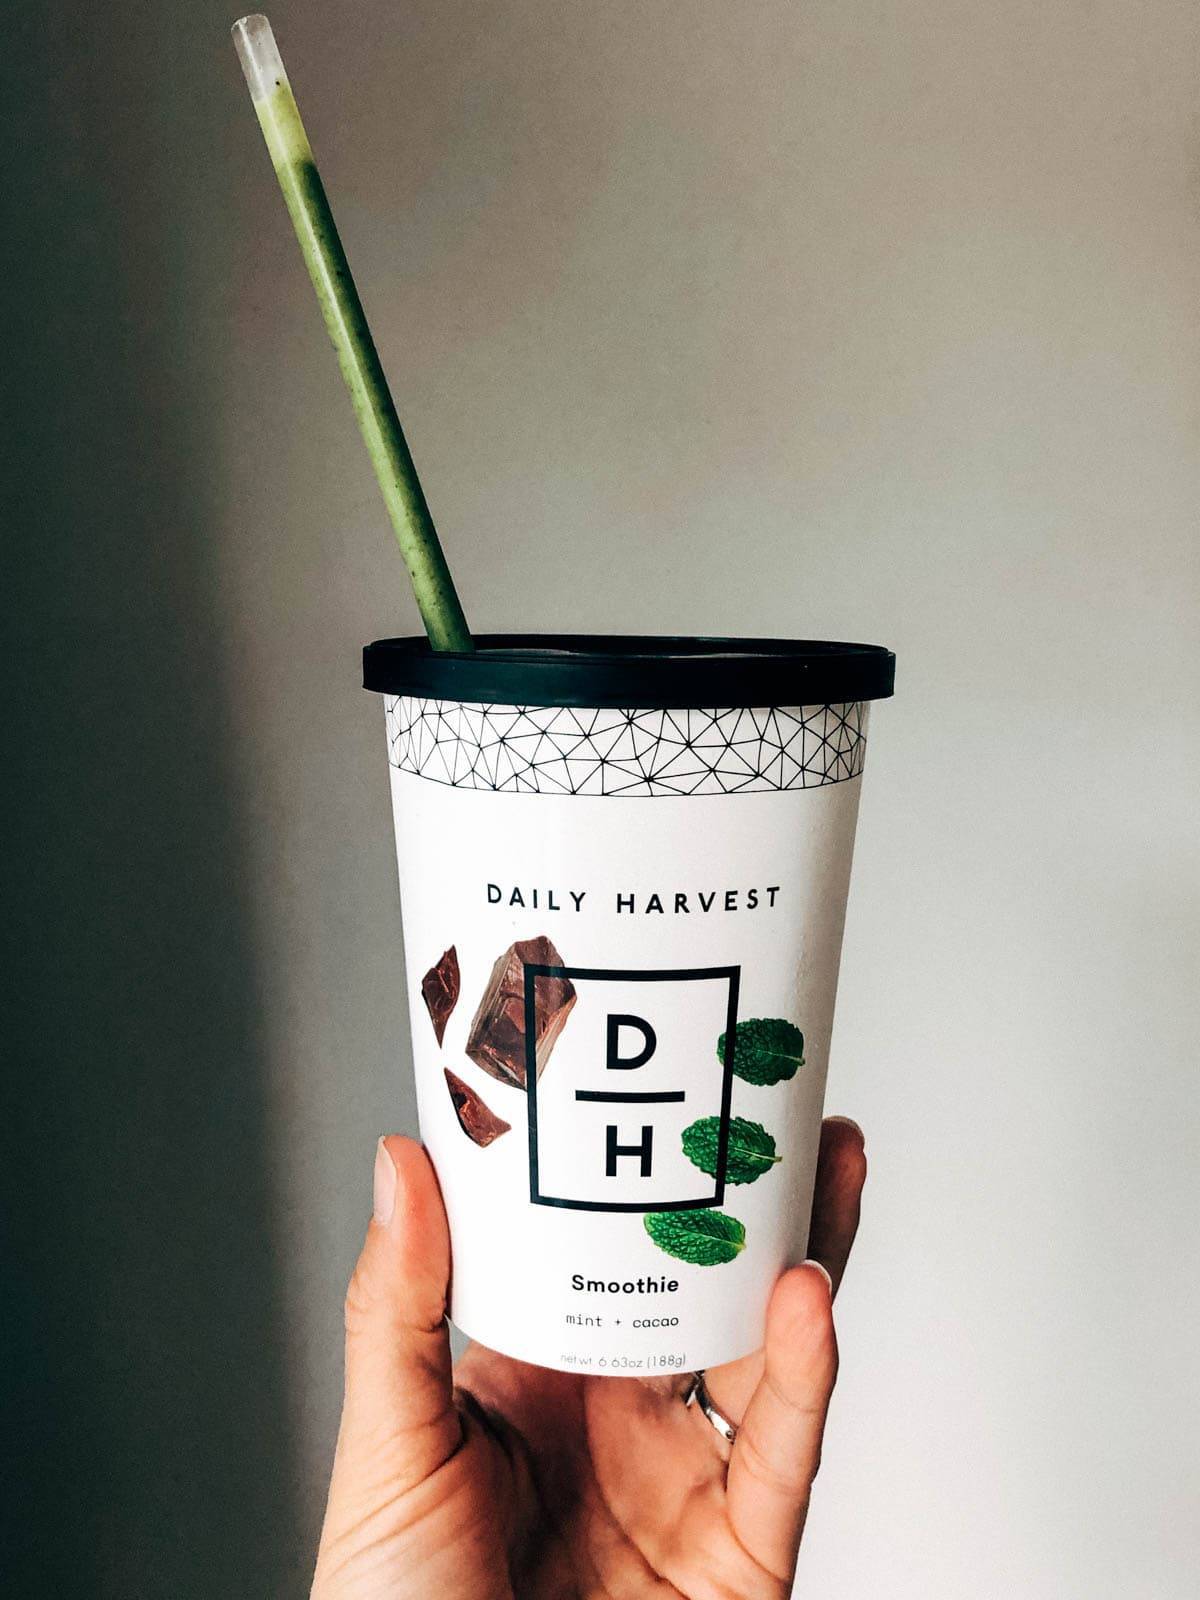 A hand holding a large cup of smoothie named Daily Harvest.